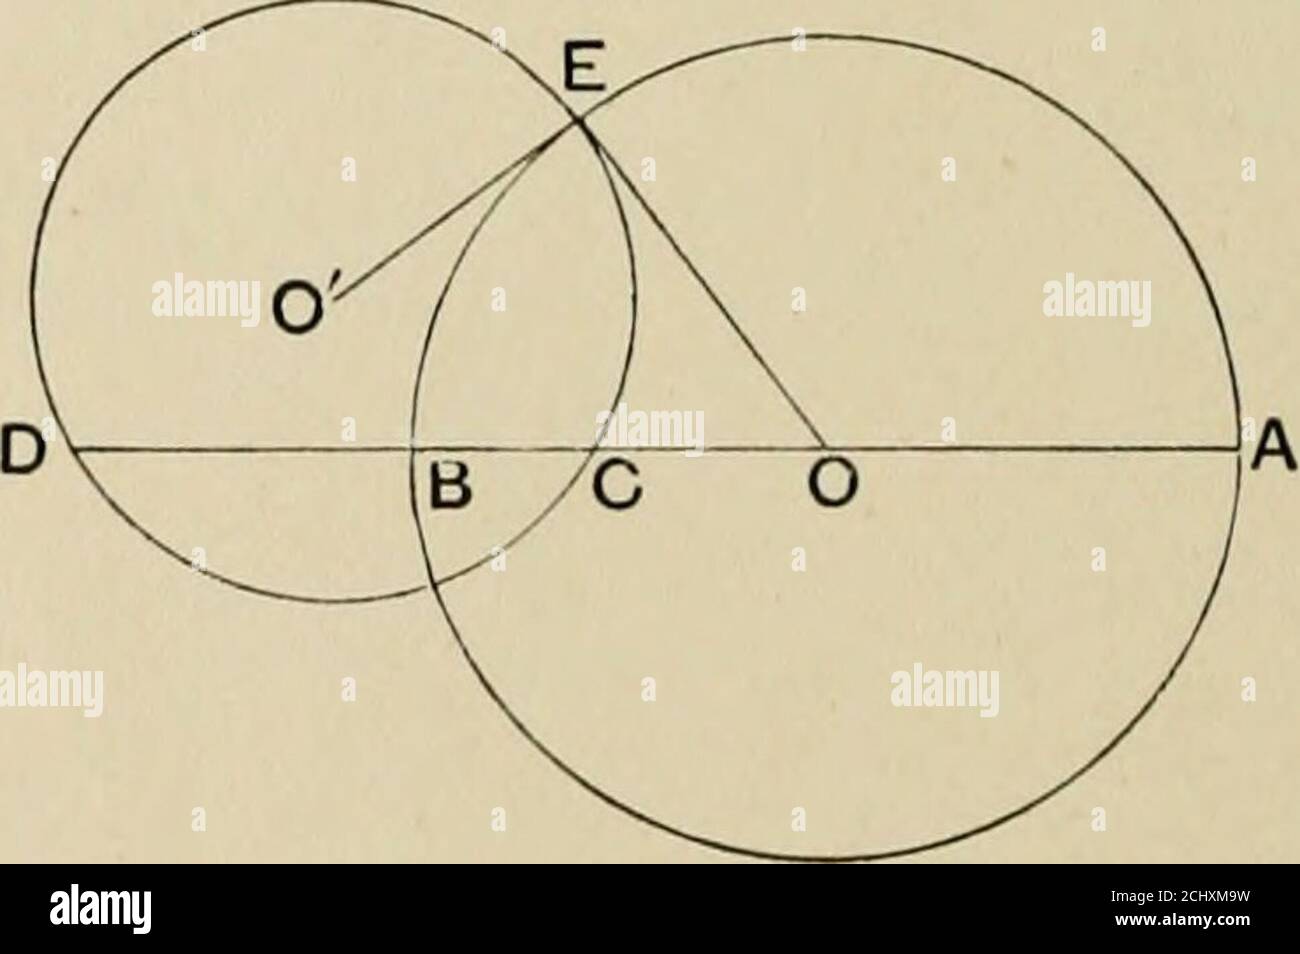 The principles of projective geometry applied to the straight line and  conic . ntheorems true for the circle which do not hold for the conic. The  moreimportant of these are given